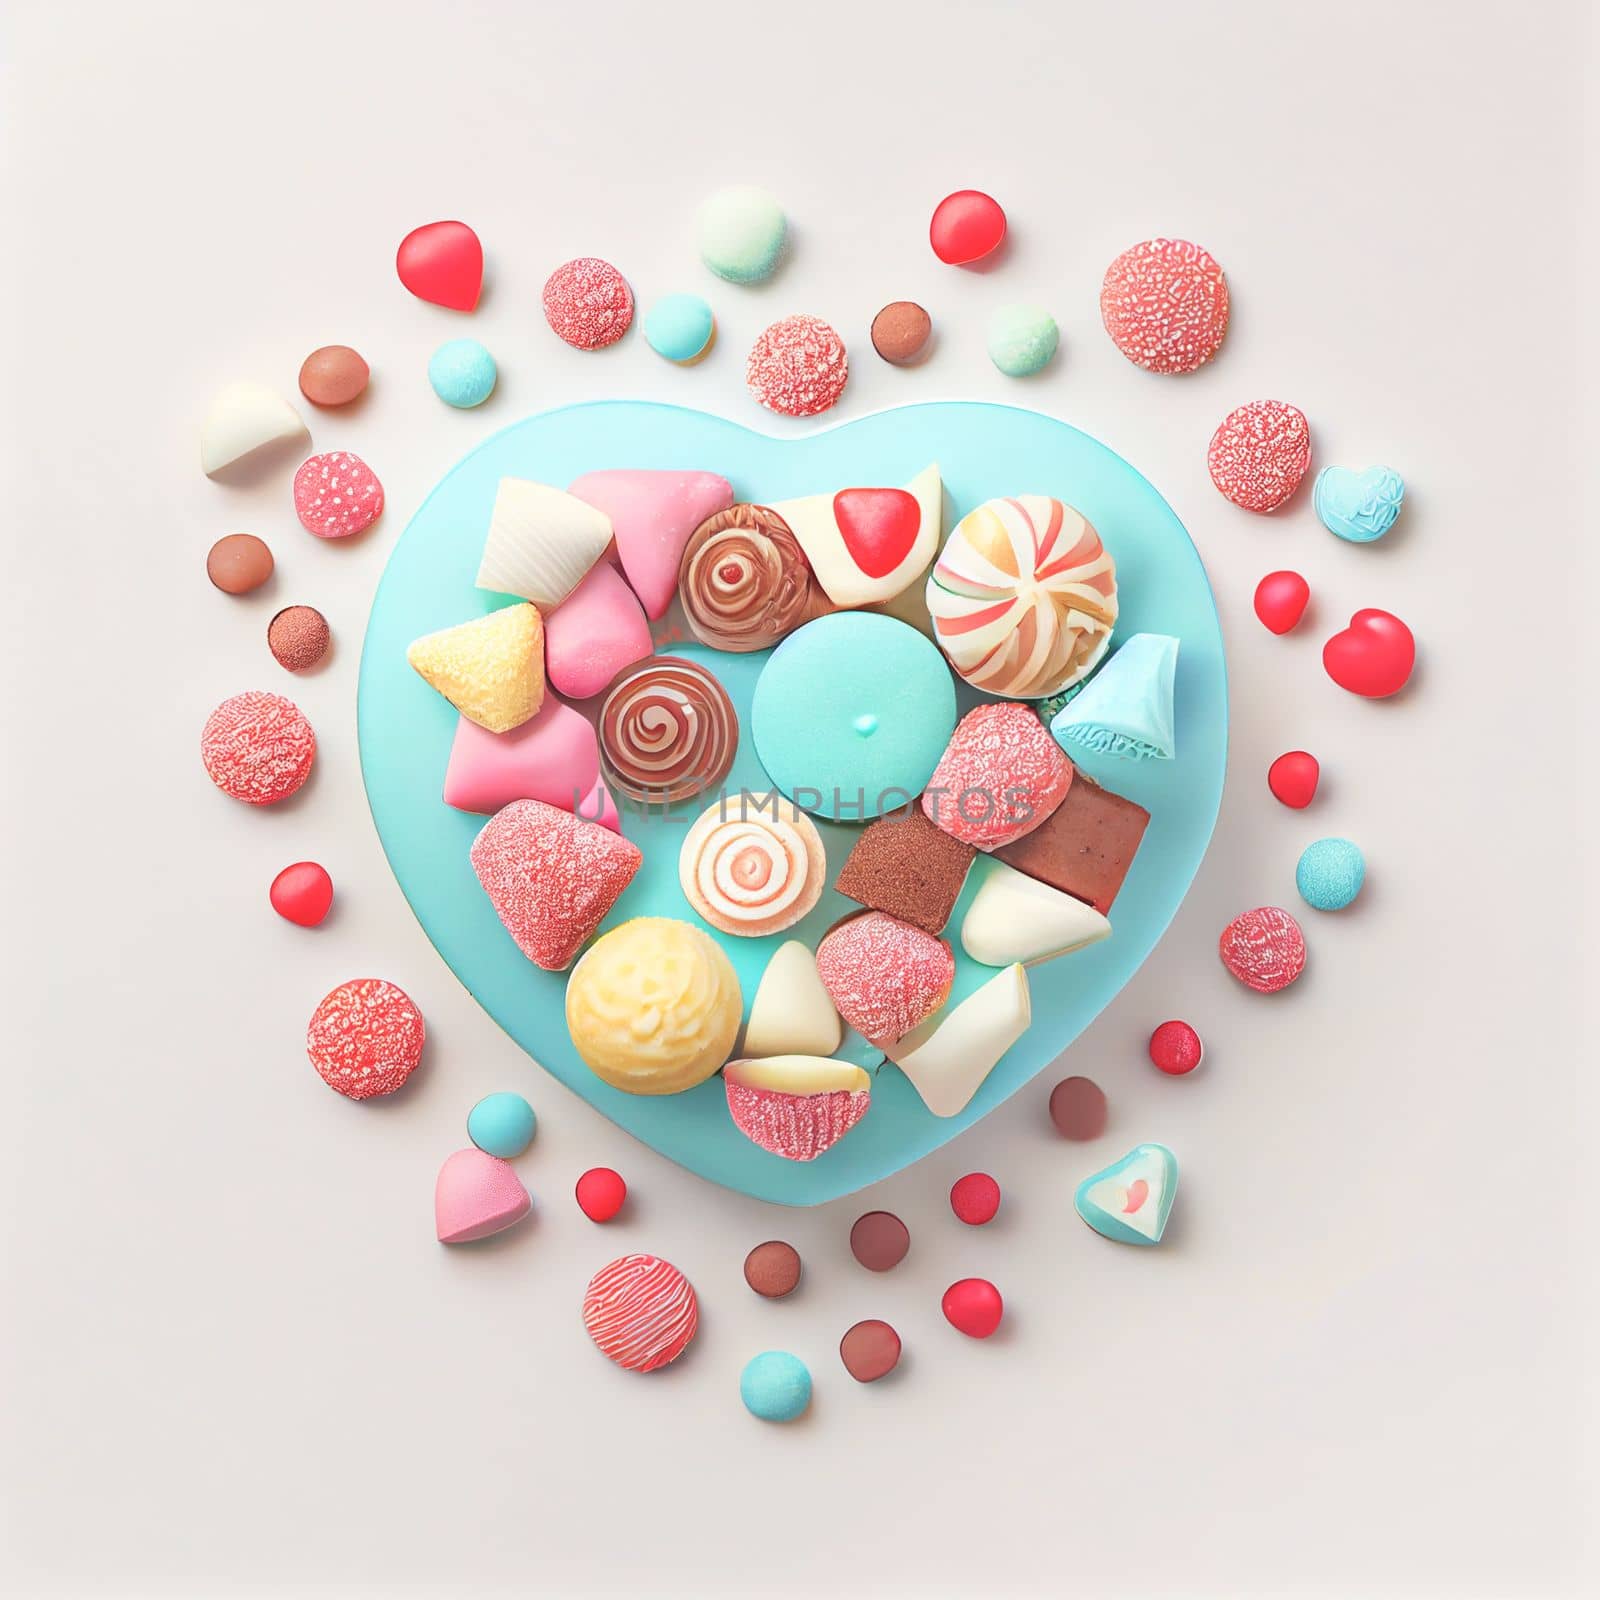 Close up shot of sweets for Valentine's Day background with copy space. Gift ideas for Valentine. by FokasuArt